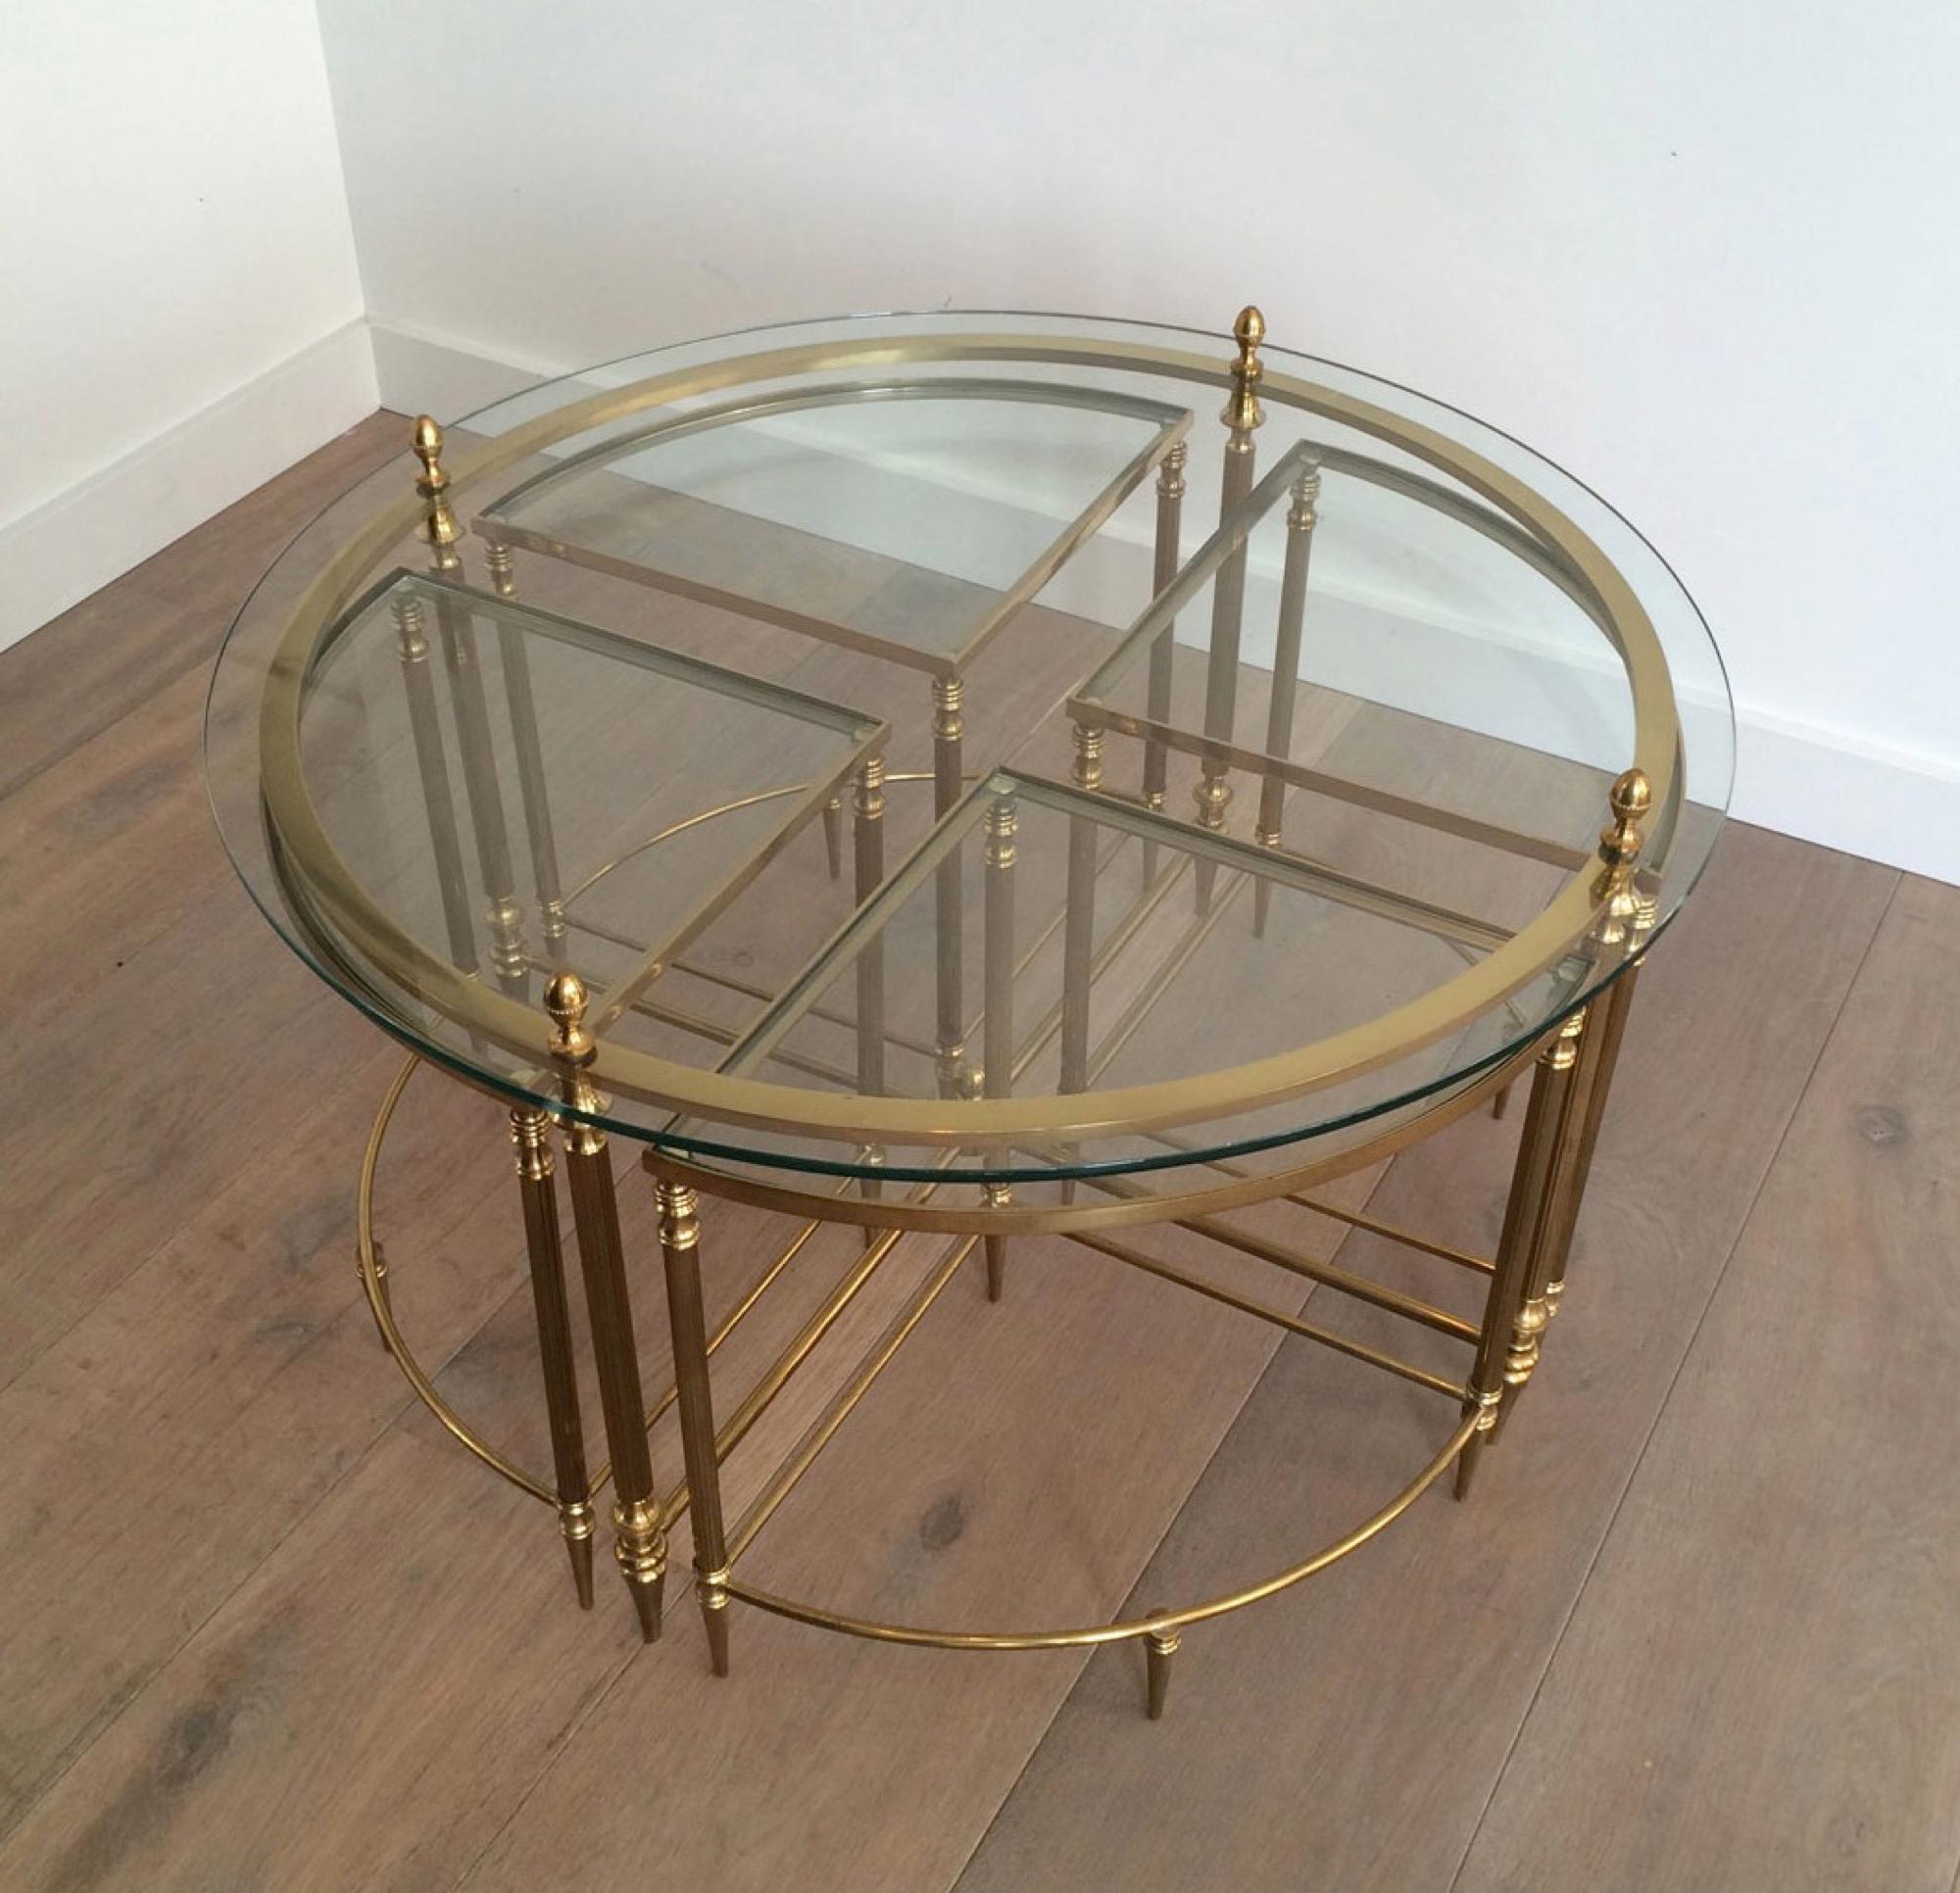 This eoclassical round coffee table is made of brass with 4 corner nesting tables. This is a French work by famous Frenvch designer Maison Bagués. Circa 1940.